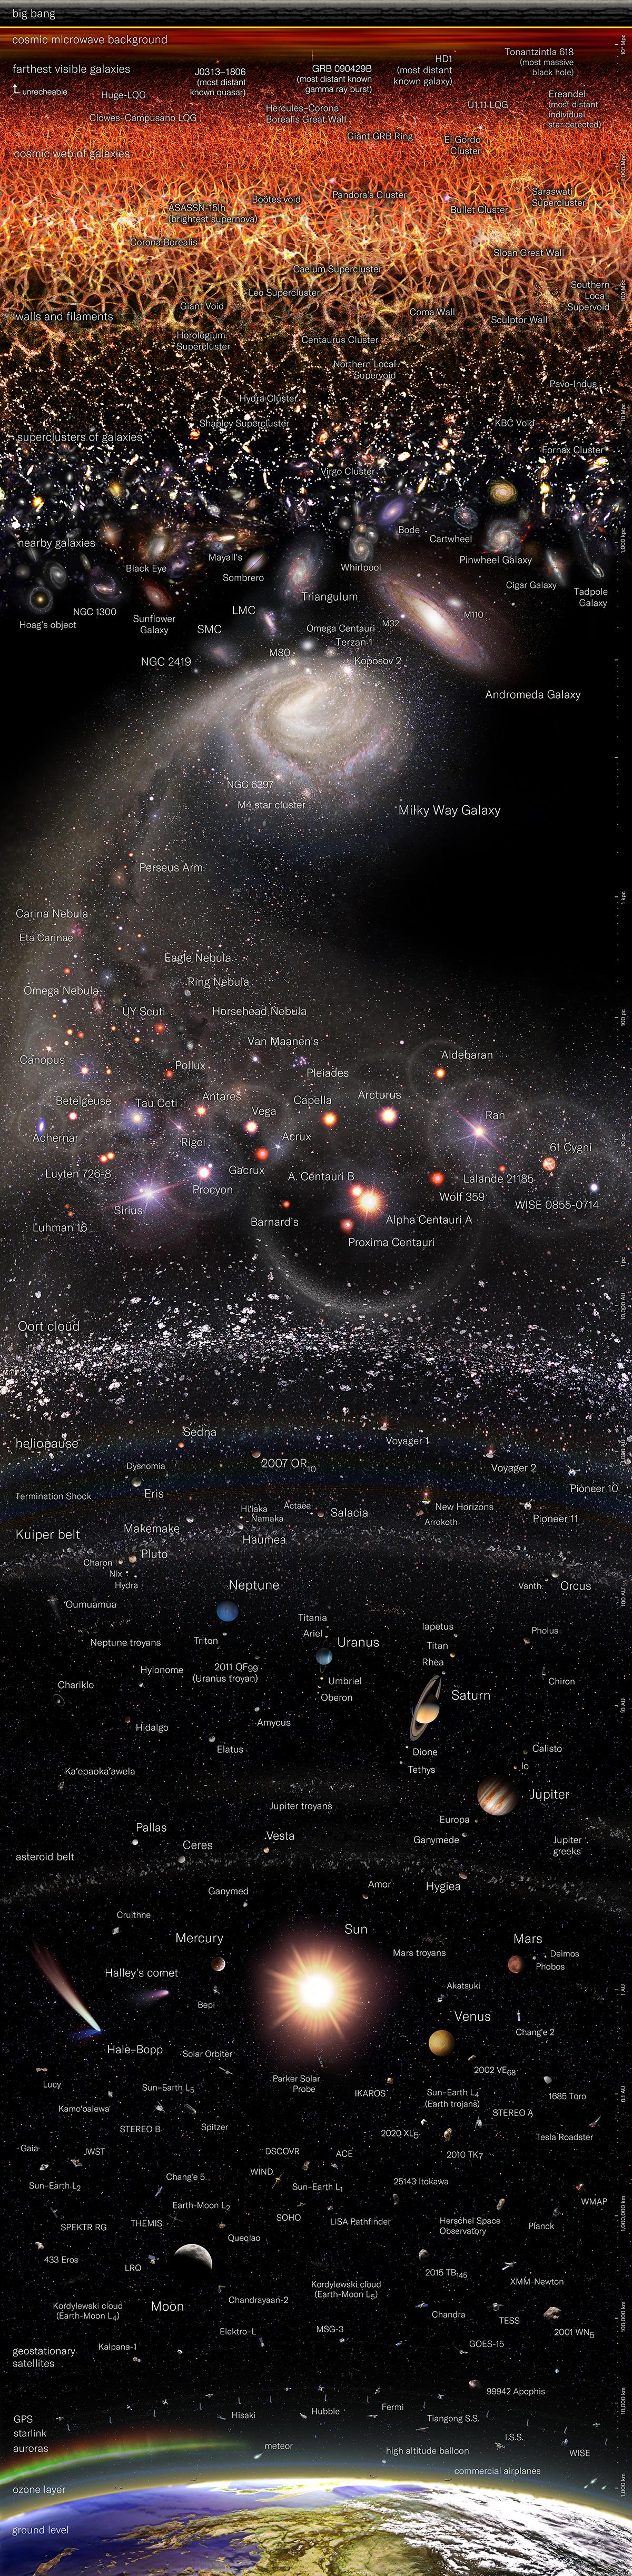 logarithmic view universe history